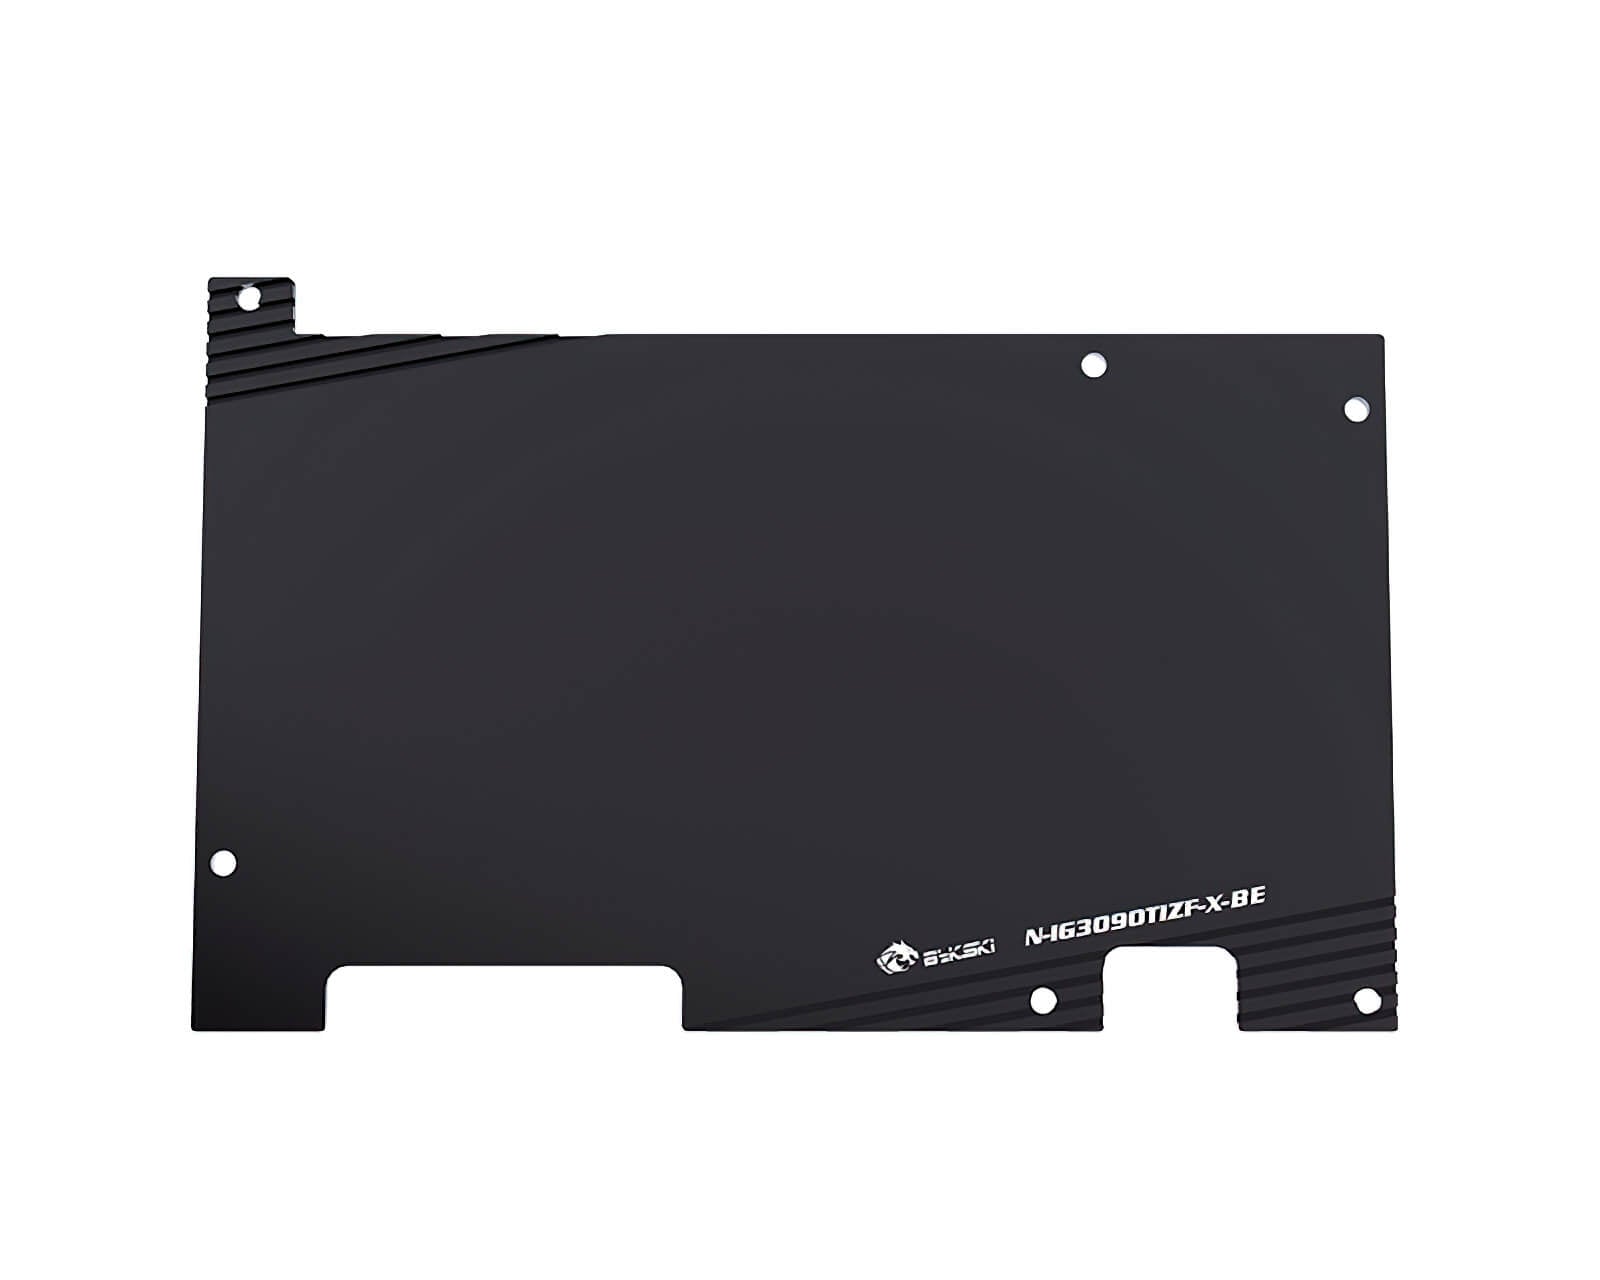 Bykski Full Coverage GPU Water Block and Backplate for iGame RTX 3090Ti 24G (N-IG3090TIZF-X) - PrimoChill - KEEPING IT COOL